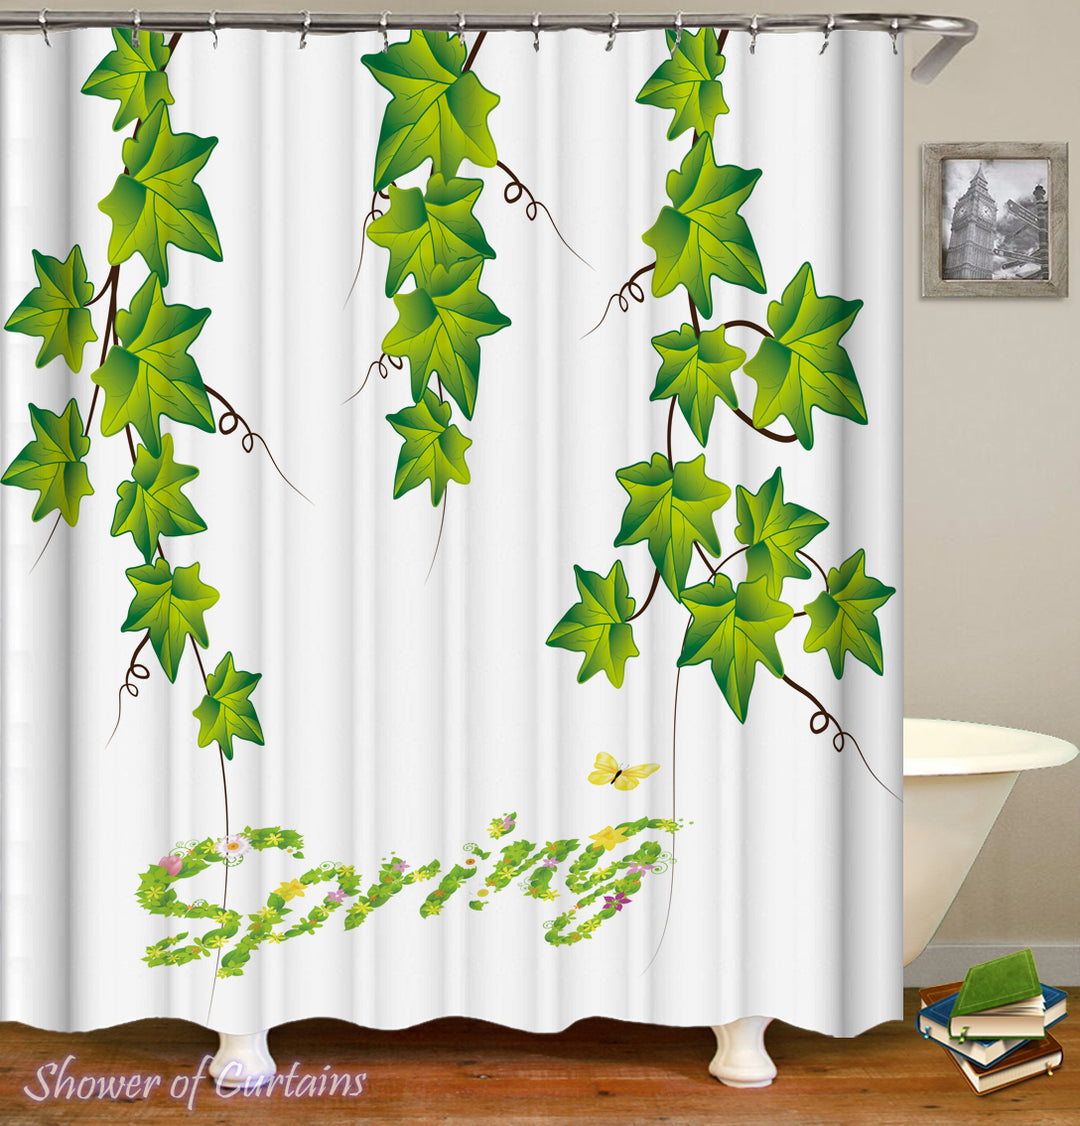 Spring shower curtain 2018